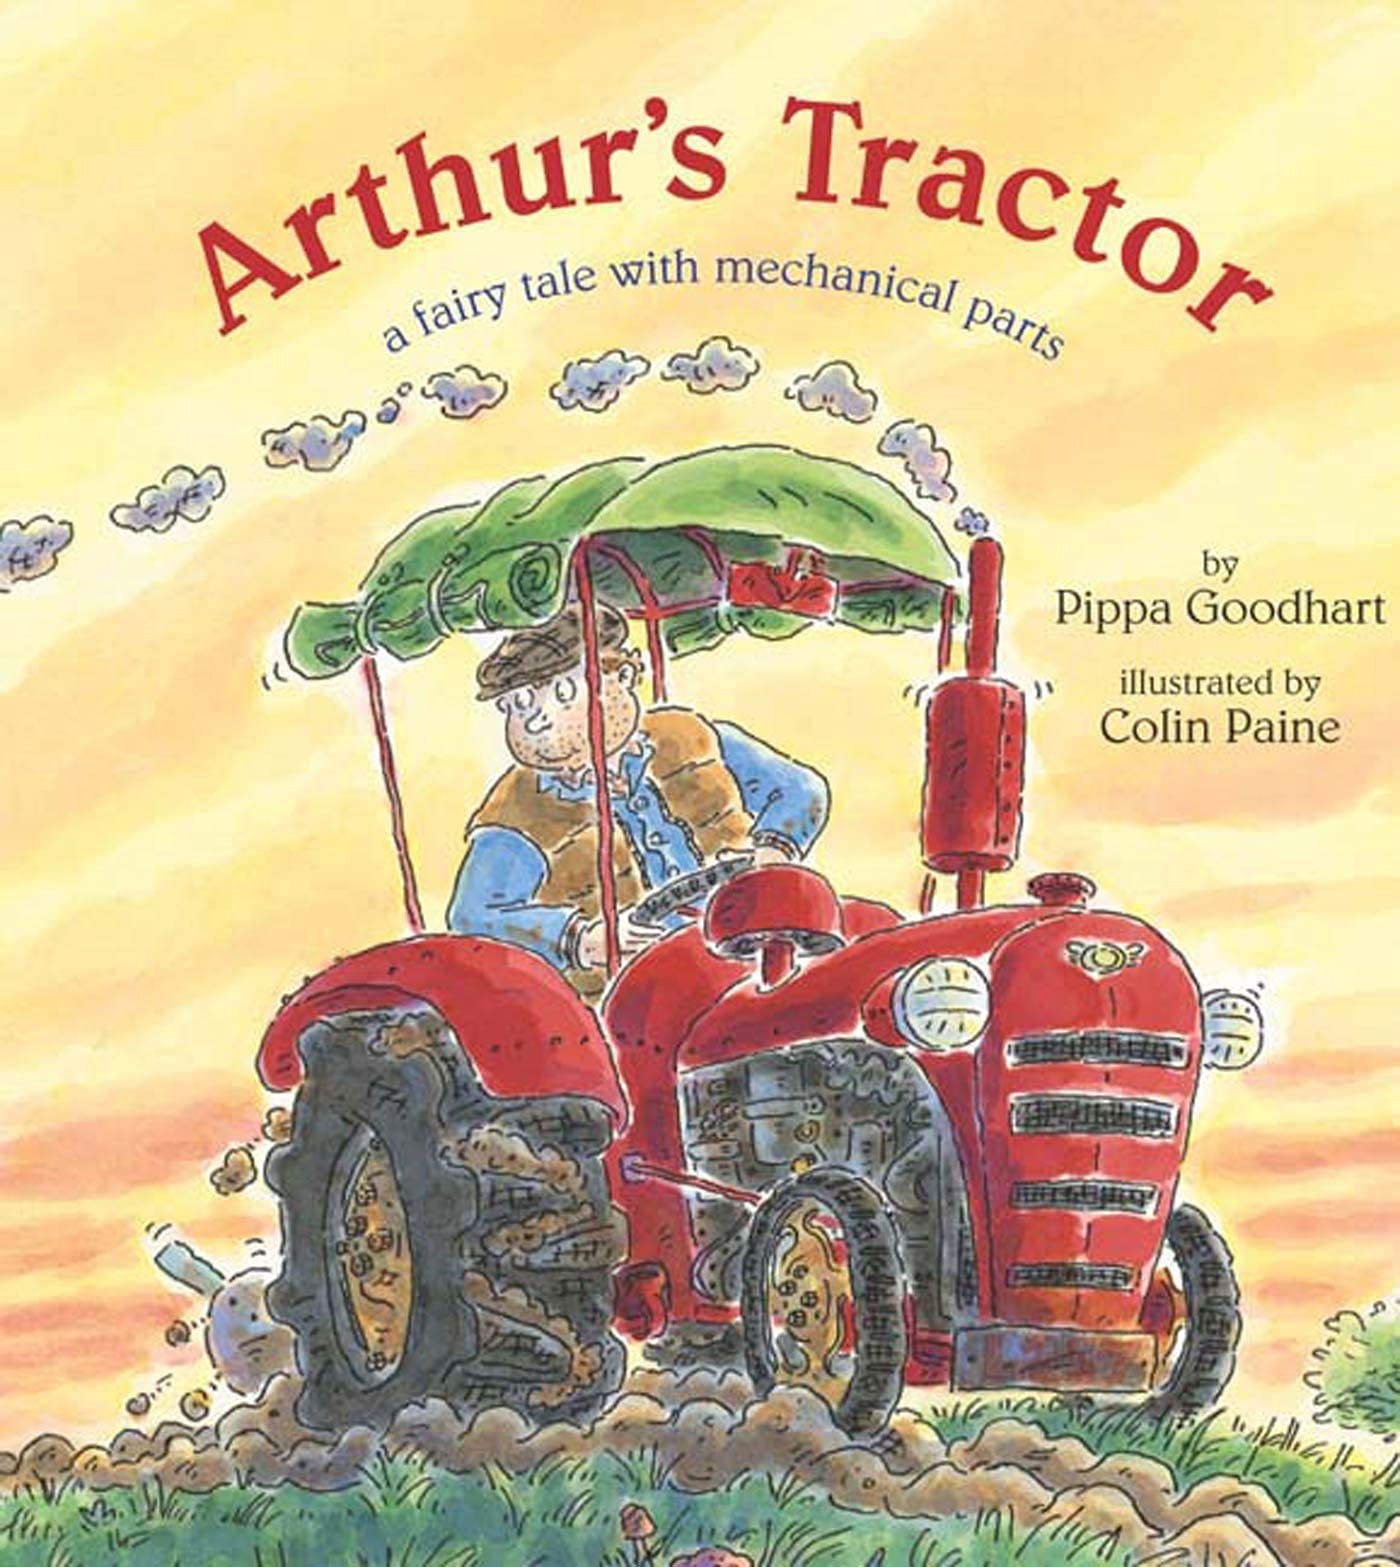 Arthur’s Tractor: A Fairy Tale with Mechanical Parts